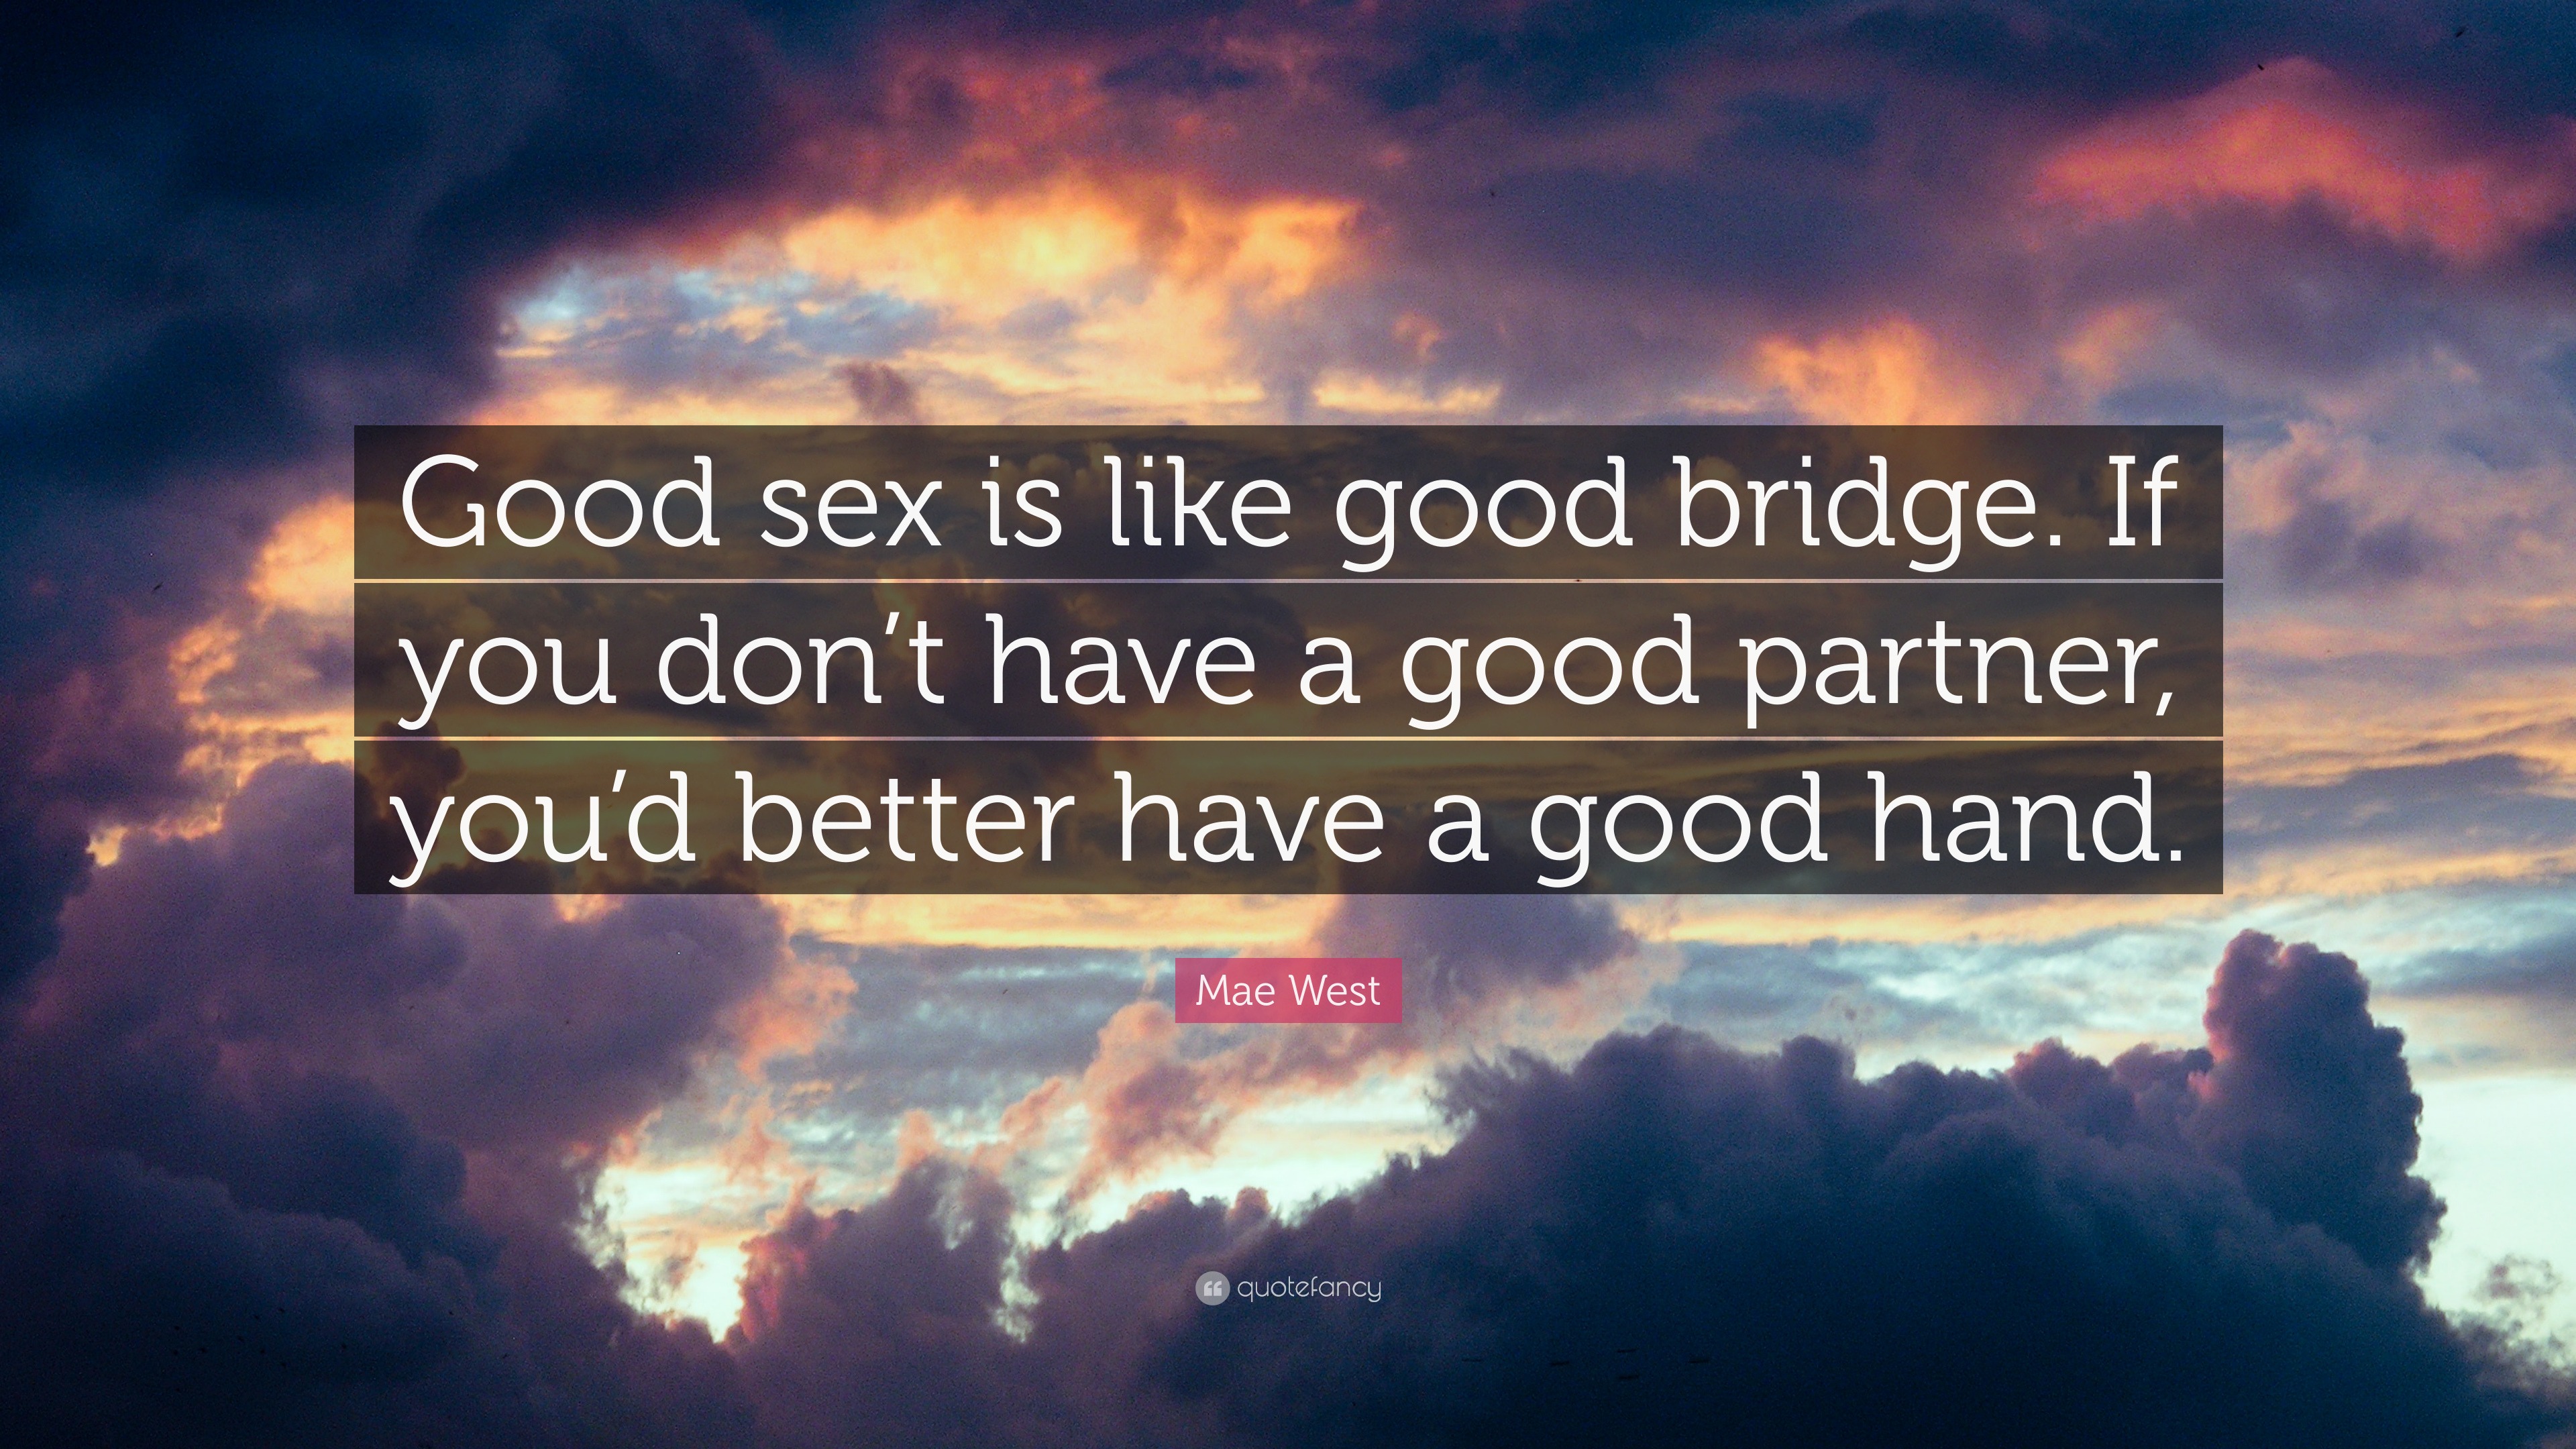 Mae West Quote: “Good sex is like good bridge. If you don’t have a good